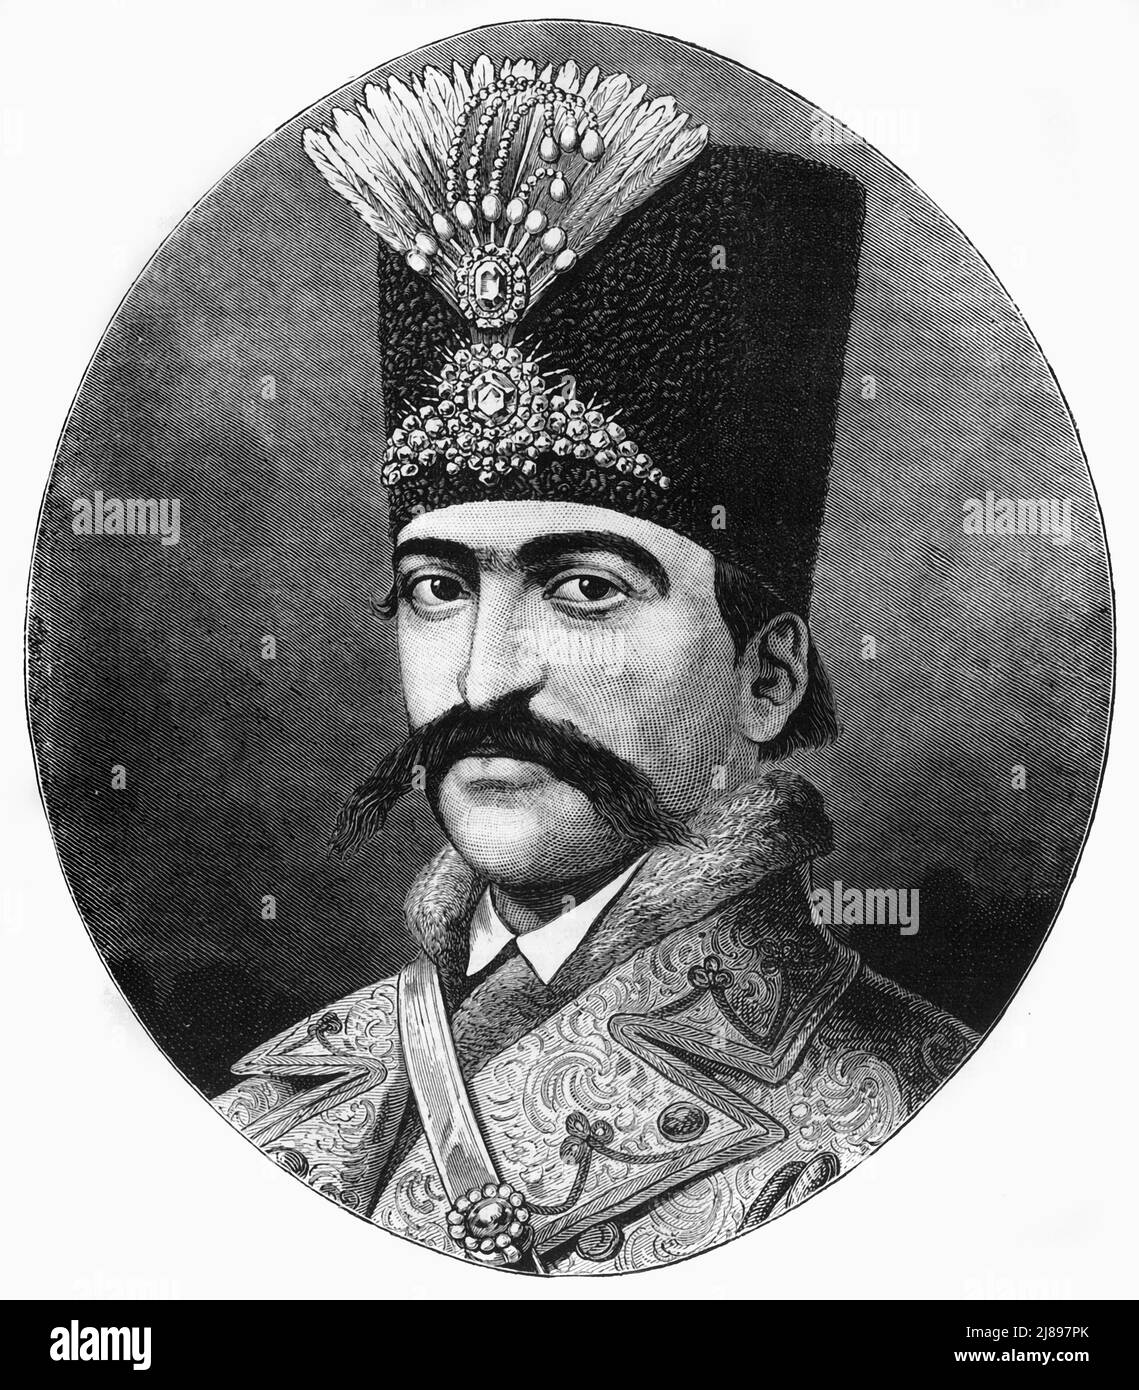 'Portrait of Nasser-Ed-Deen, Shah of Persia', c1891. From &quot;Cassell's Illustrated History of India Vol. II.&quot;, by James Grant. [Cassell Petter &amp; Galpin, London, Paris and New York] Stock Photo